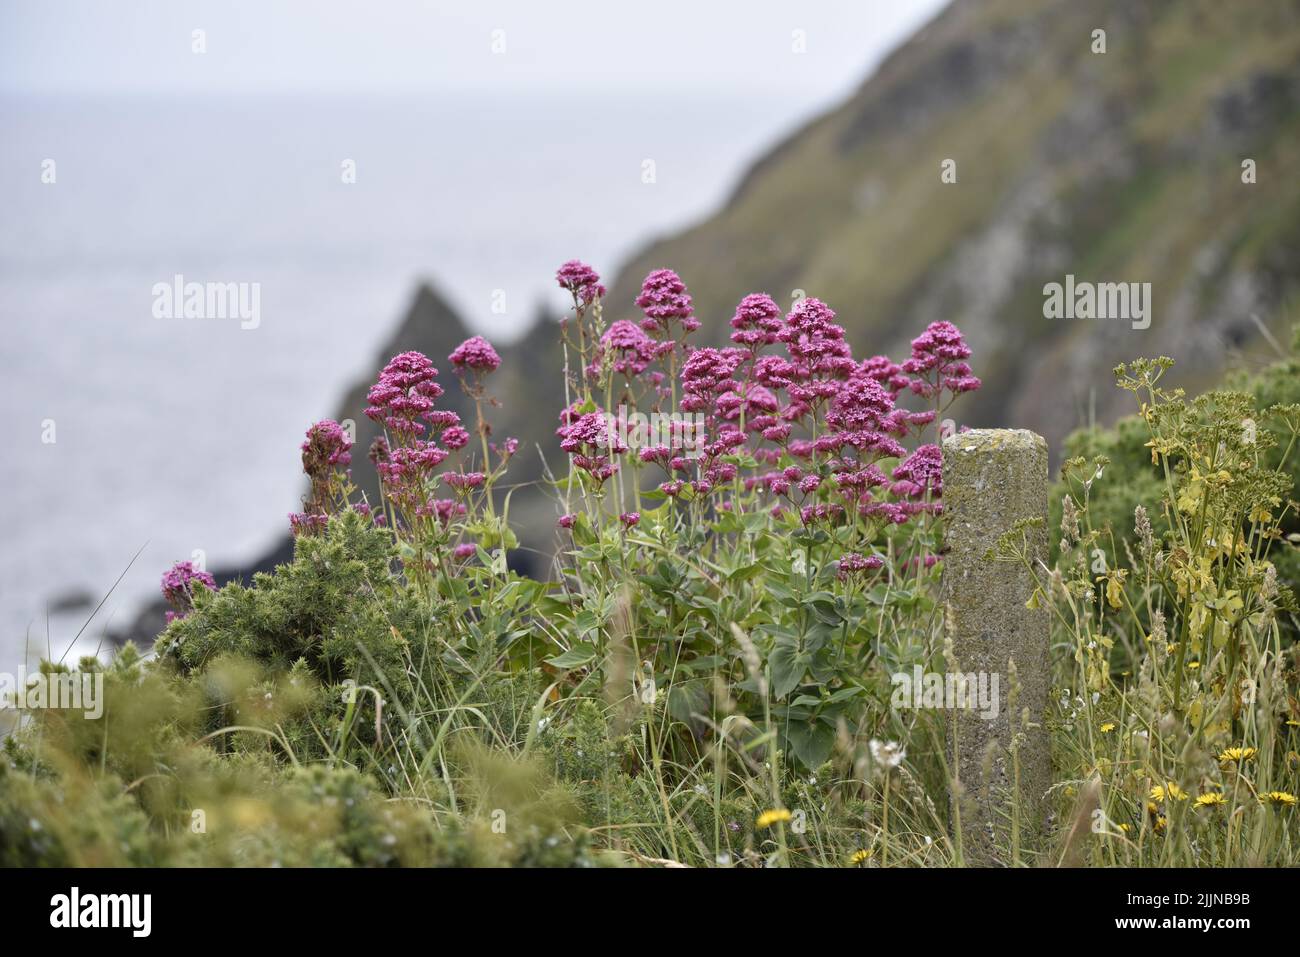 Wild Pink Valerian Flowers (Valeriana officinalis), Middle Foreground of Image, Against a Sea and Cliffs Background Taken on the Isle of Man, UK Stock Photo